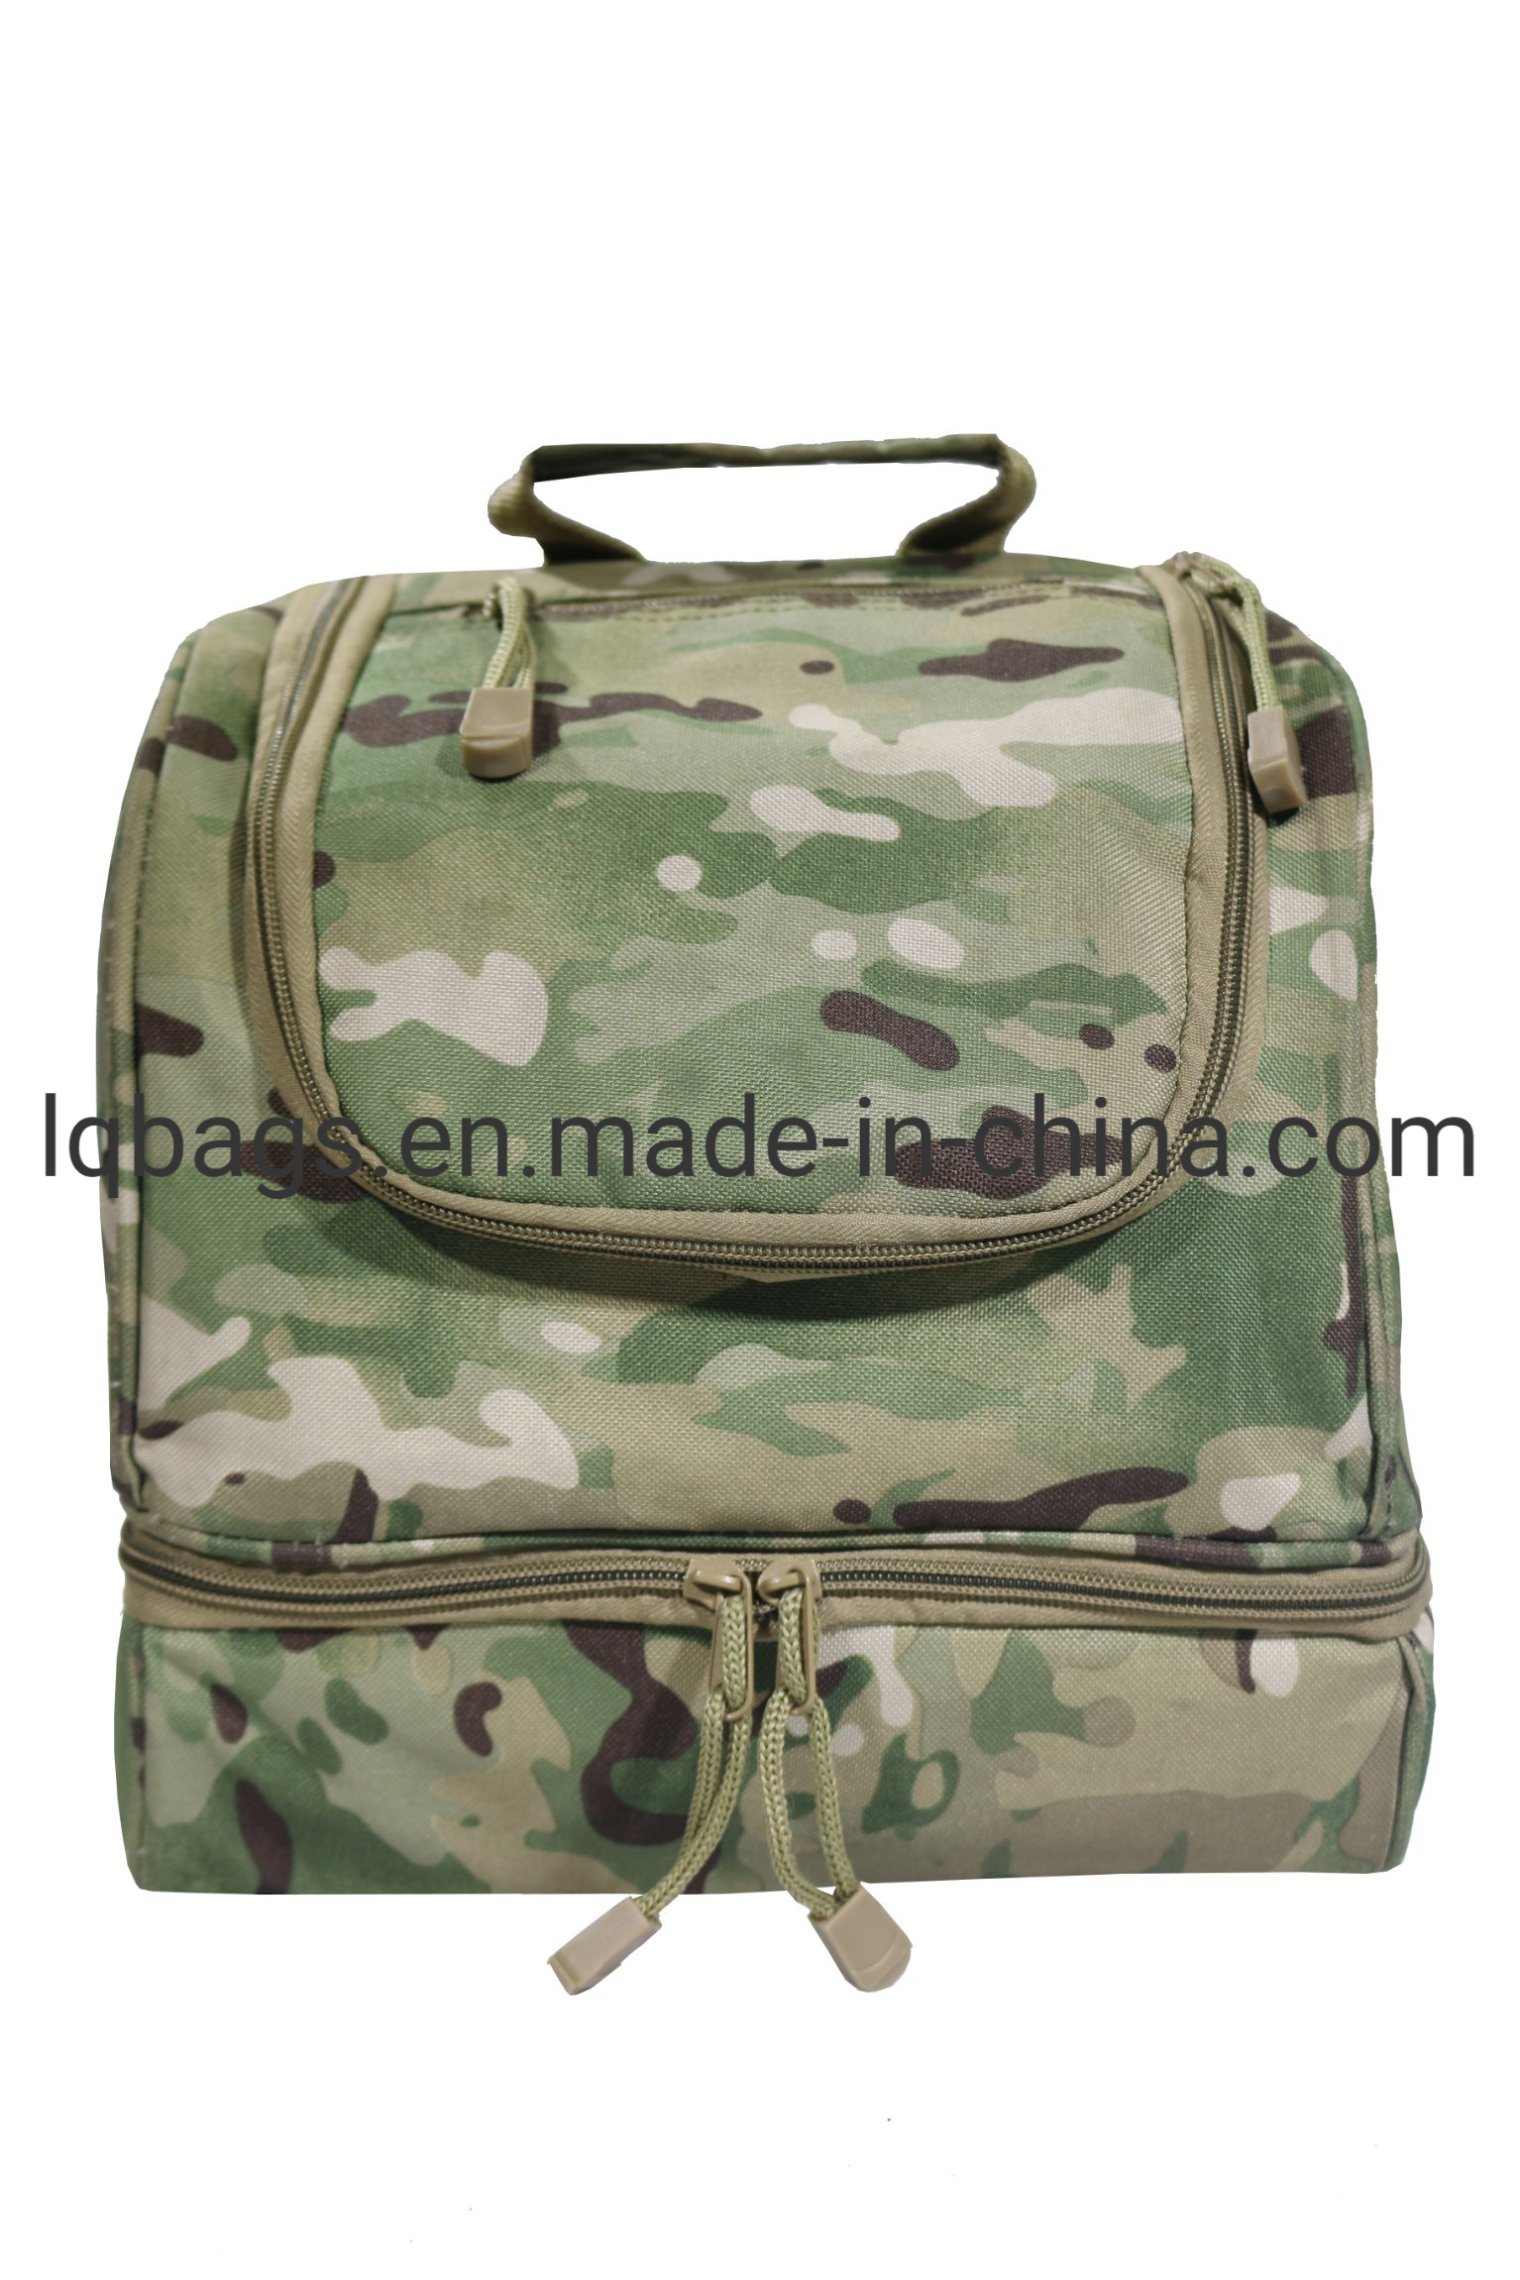 Tactical Wash Bag Organize Bag Pack for Outdoor Camping